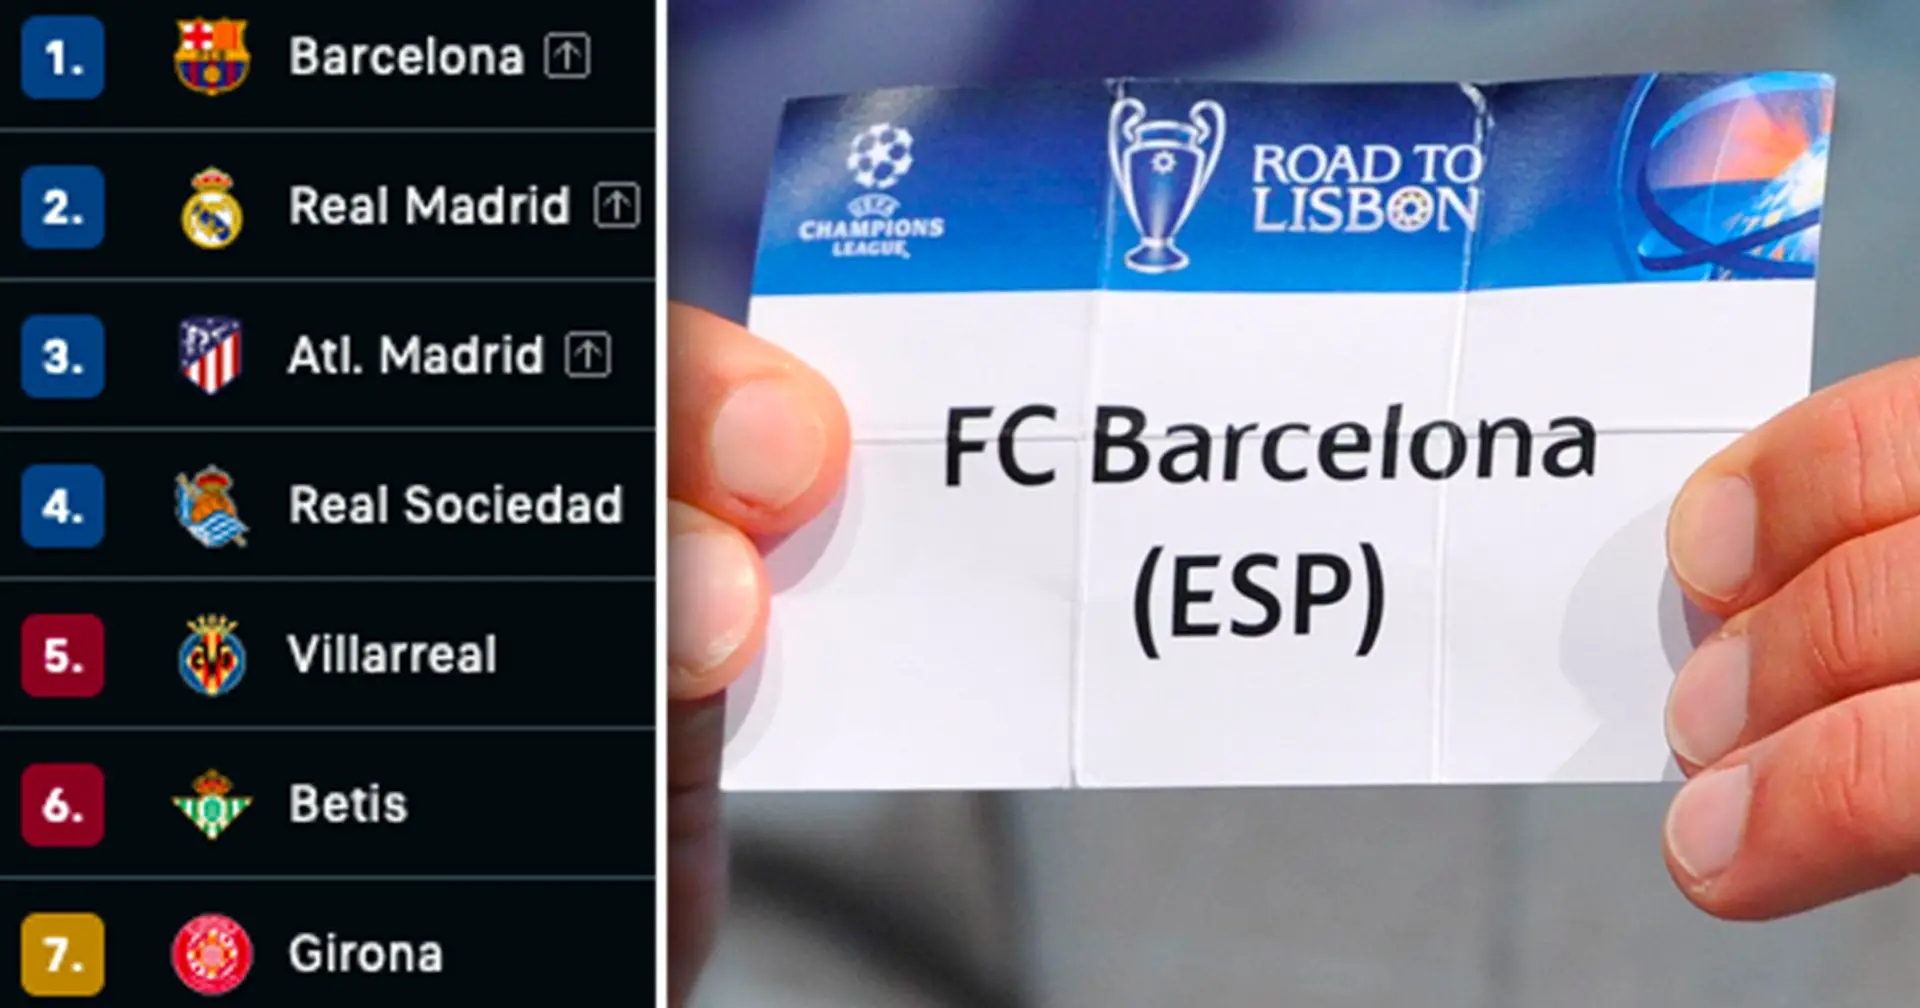 Up to 7 La Liga teams could qualify for Champions League under new format: explained